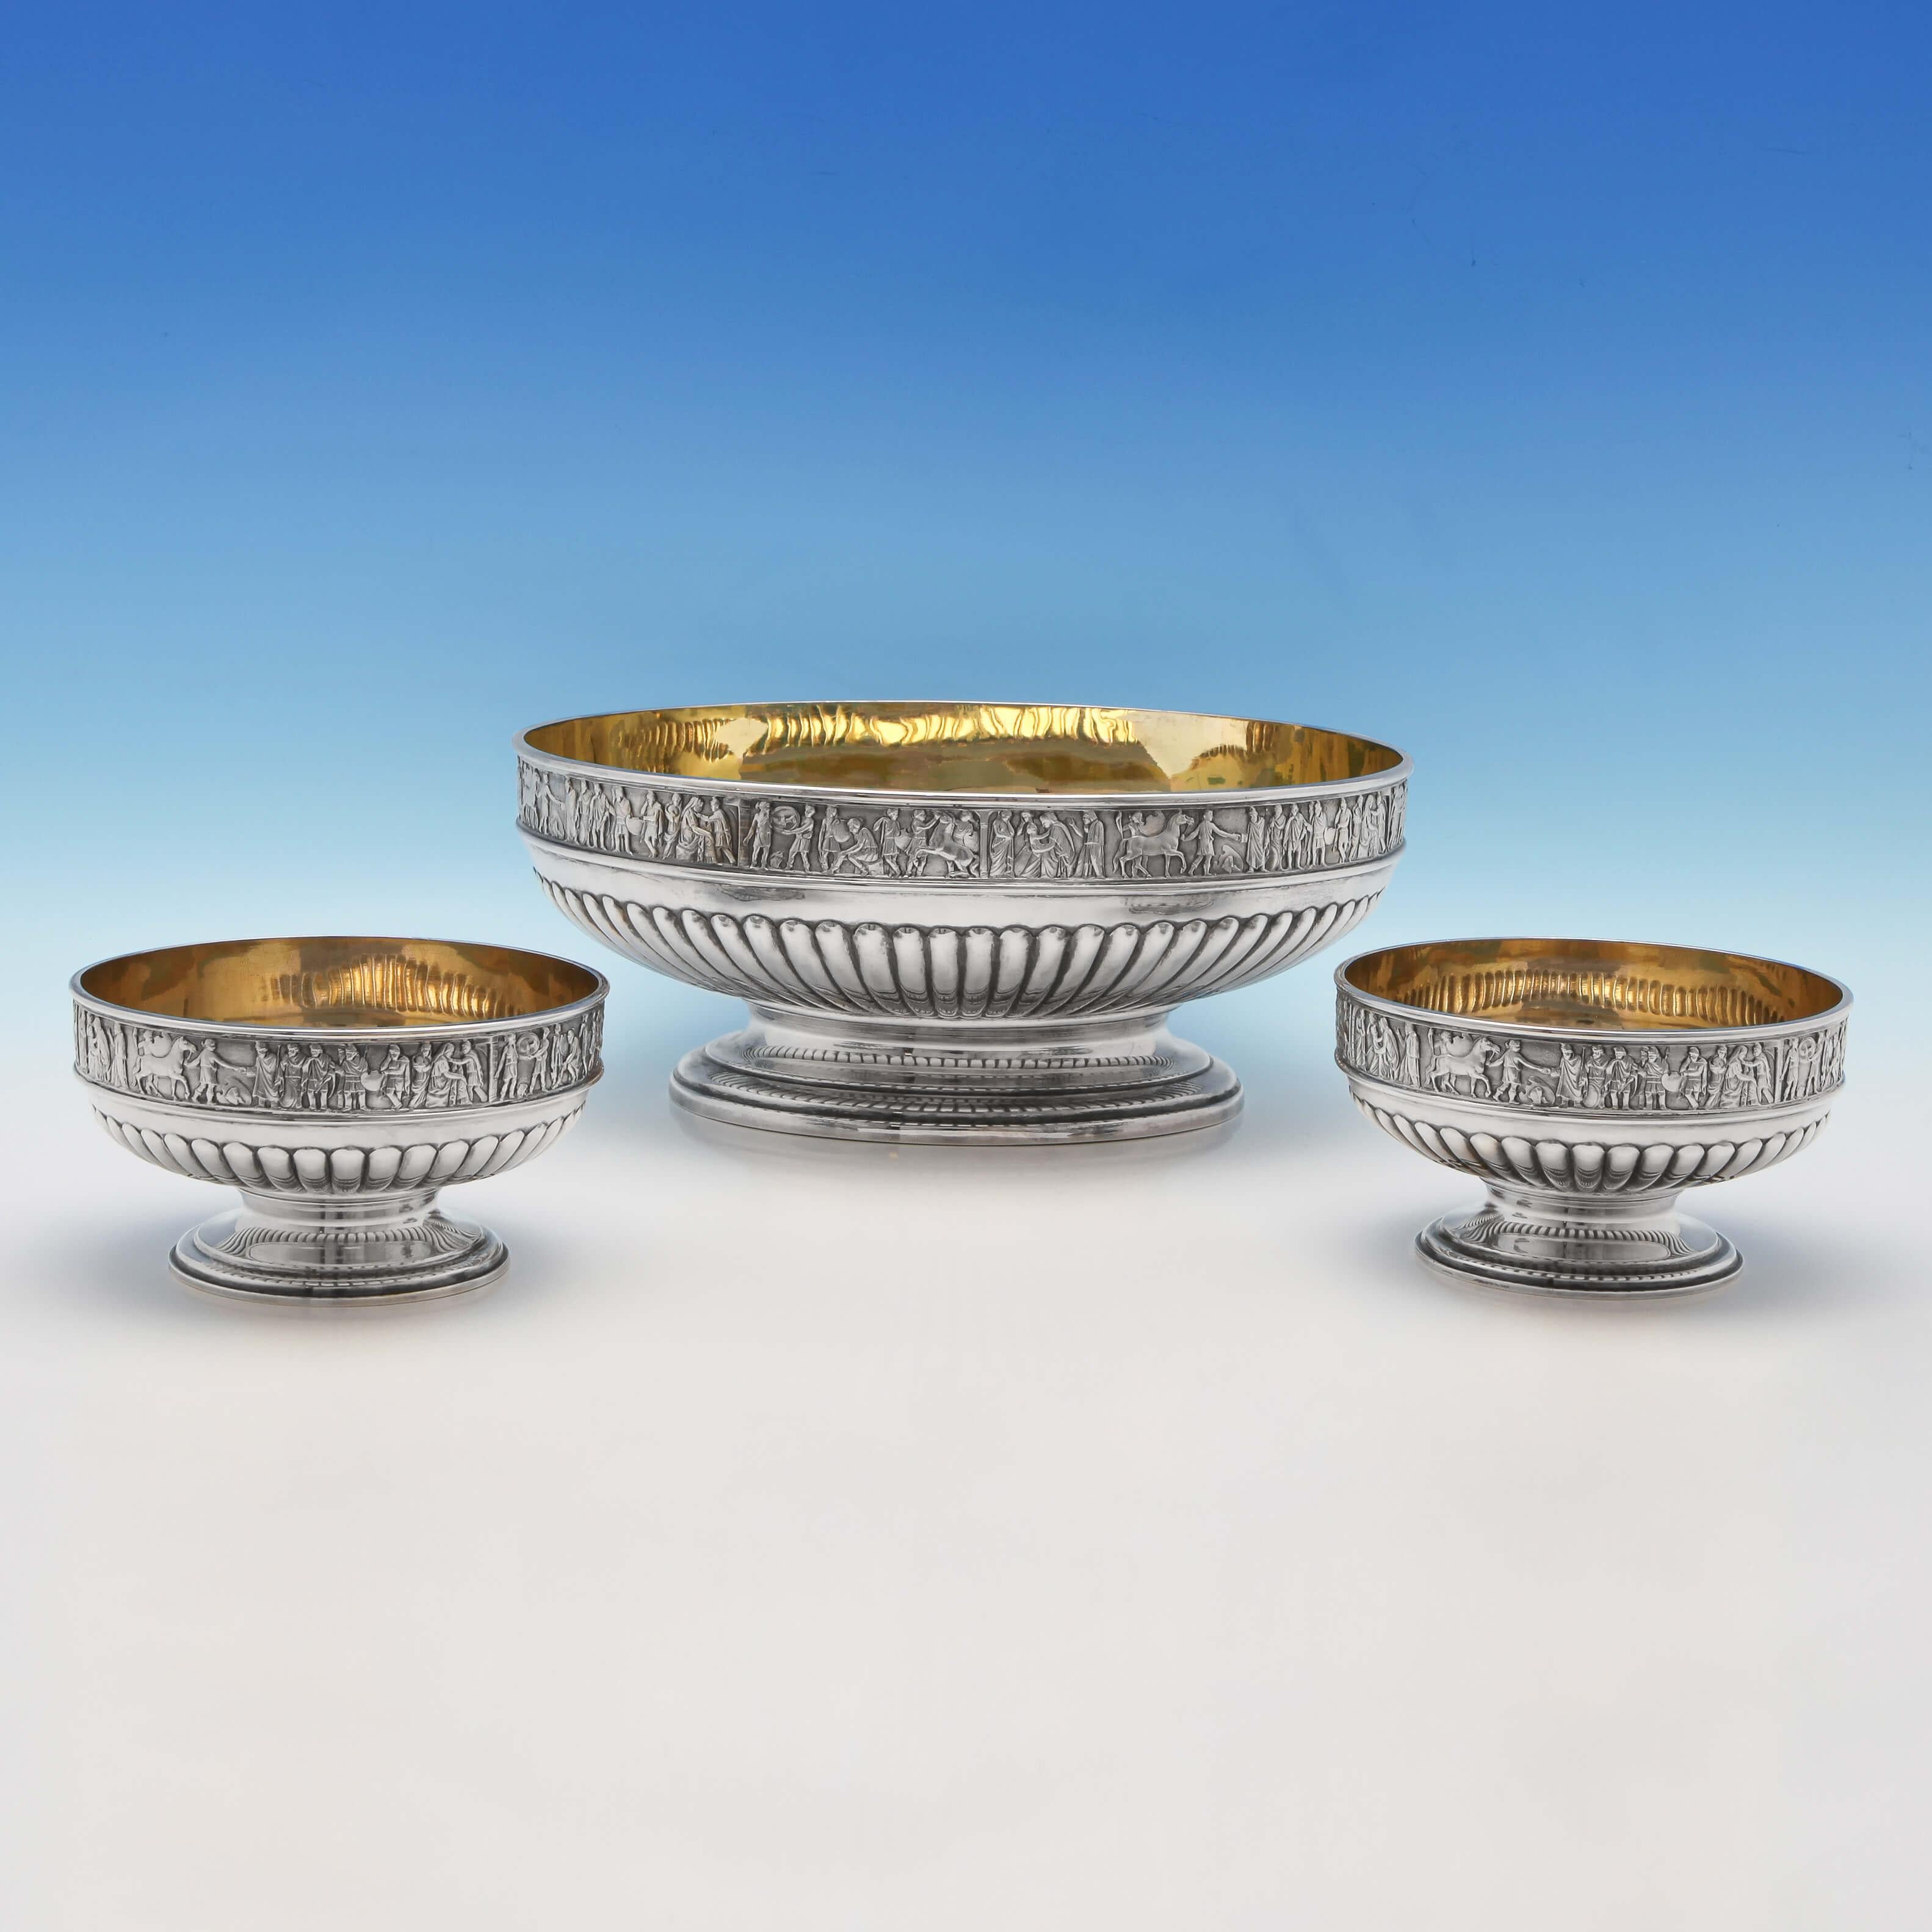 Hallmarked in London in 1892 by Elkington & Co. This heavy and impressive Antique, Victorian, Sterling Silver Set of Three Bowls sits on its original Mirror Plateau base. The bowls and plateau feature borders modelled as a classical Roman frieze.